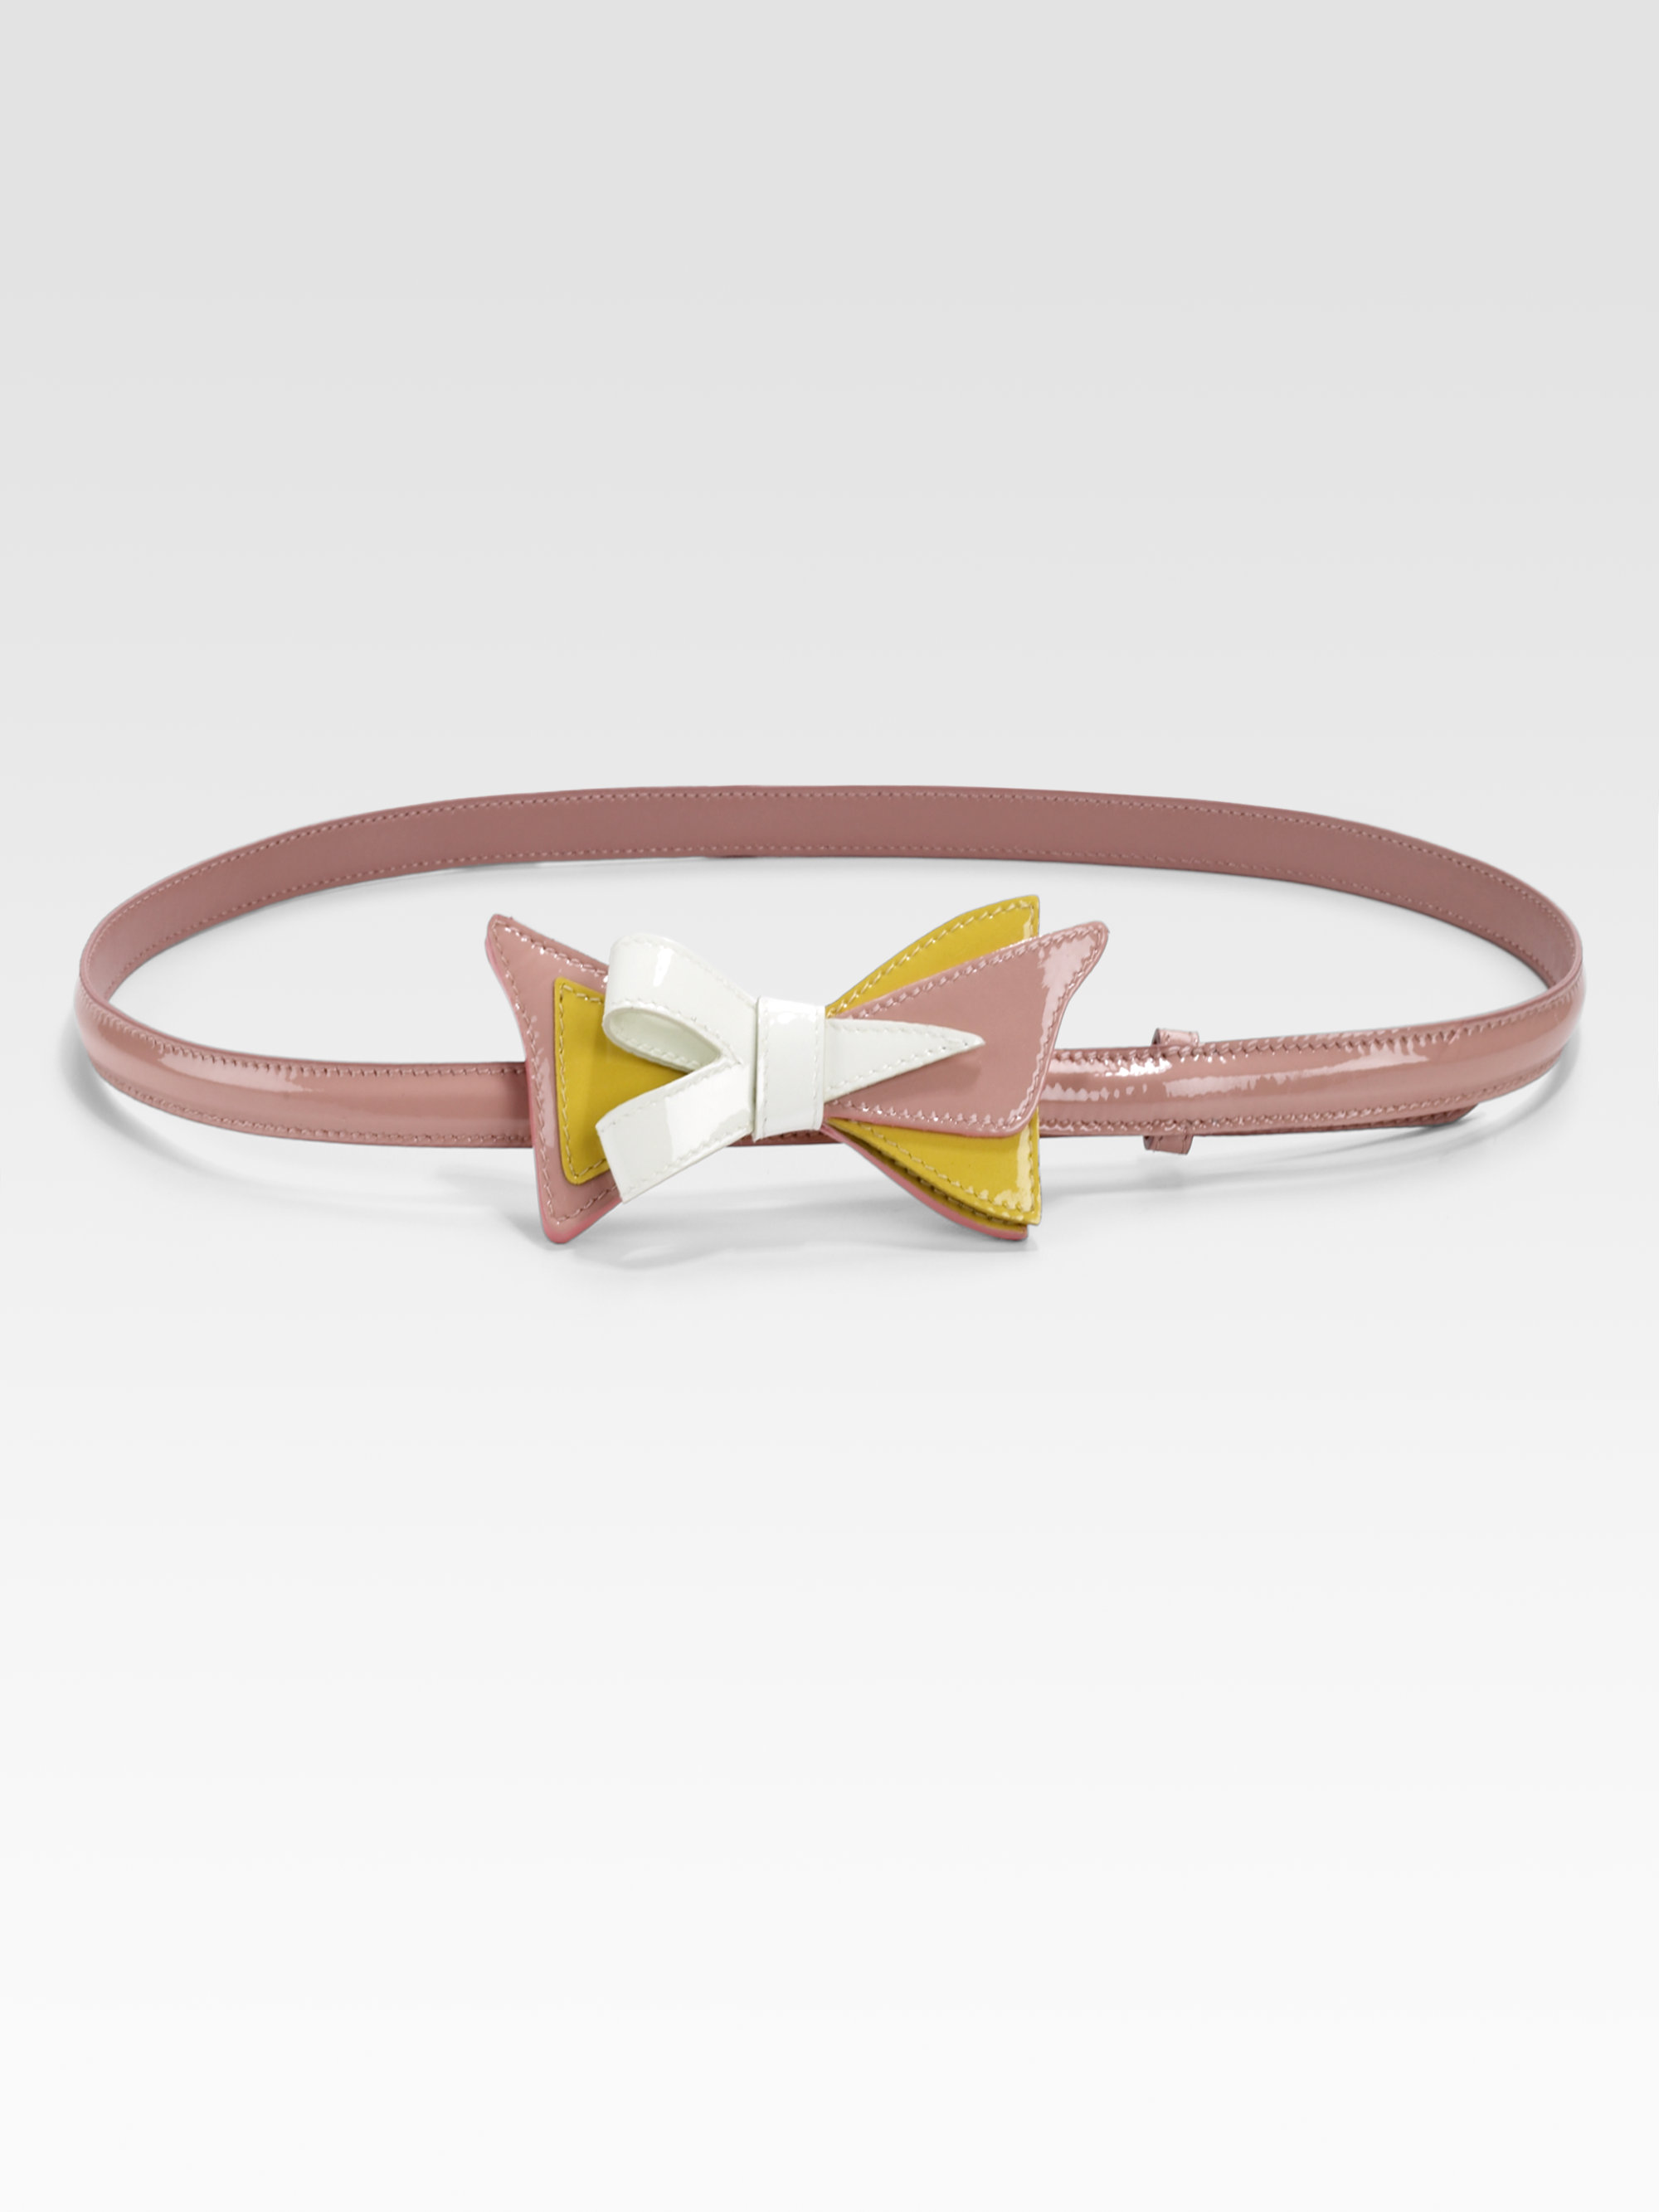 Prada Tricolored Patent Leather Bow Belt in Beige (orchidea) | Lyst  